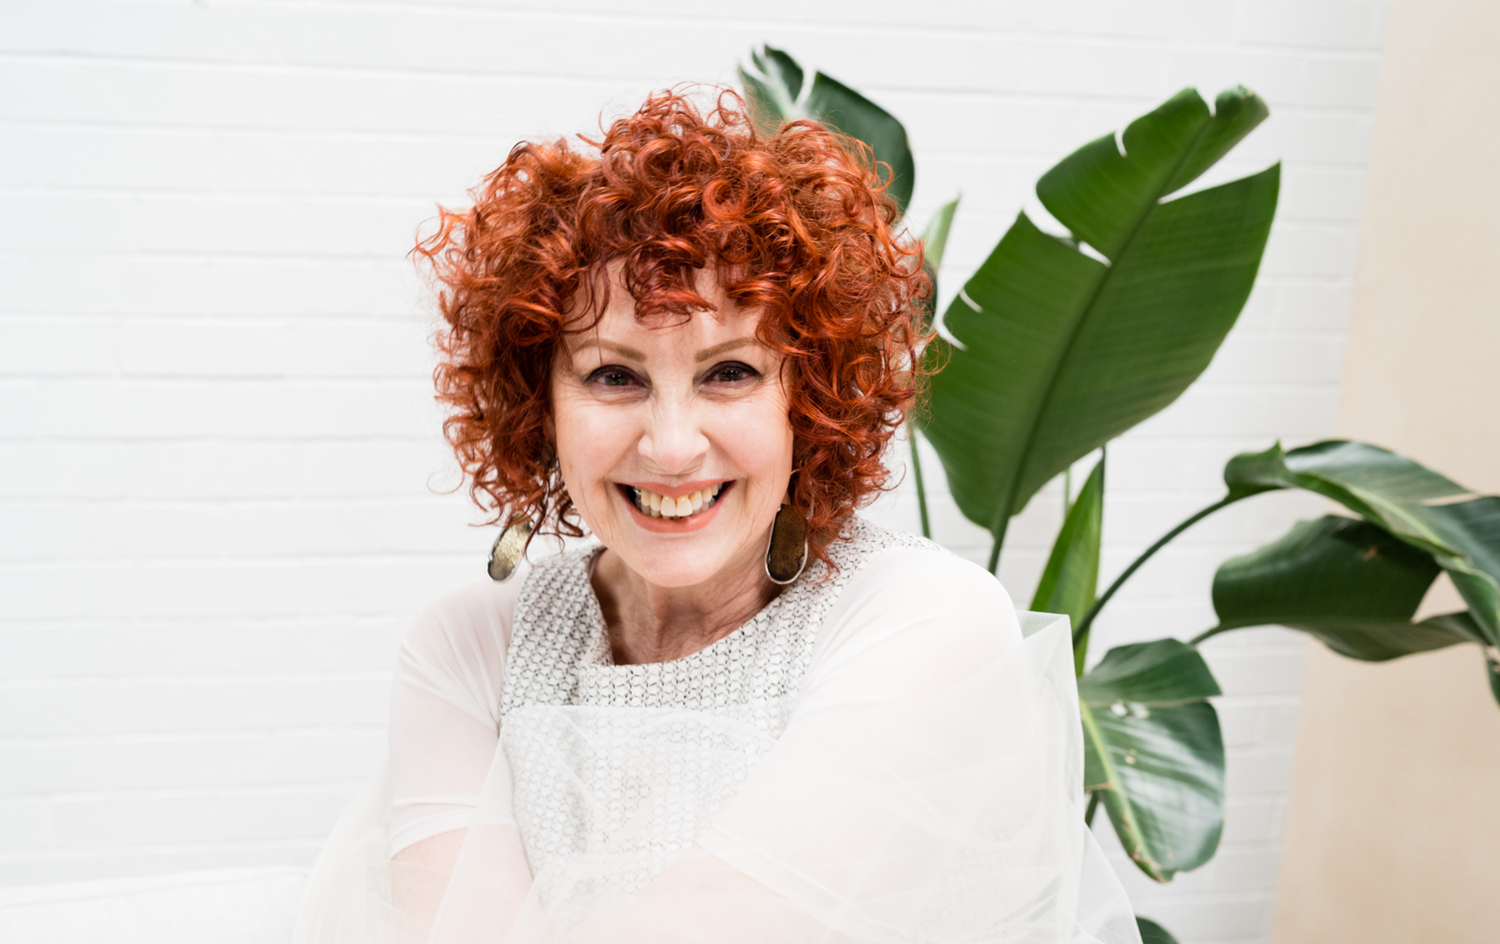 Easy ways to be more Sustainable - from a Curly Hair Specialist